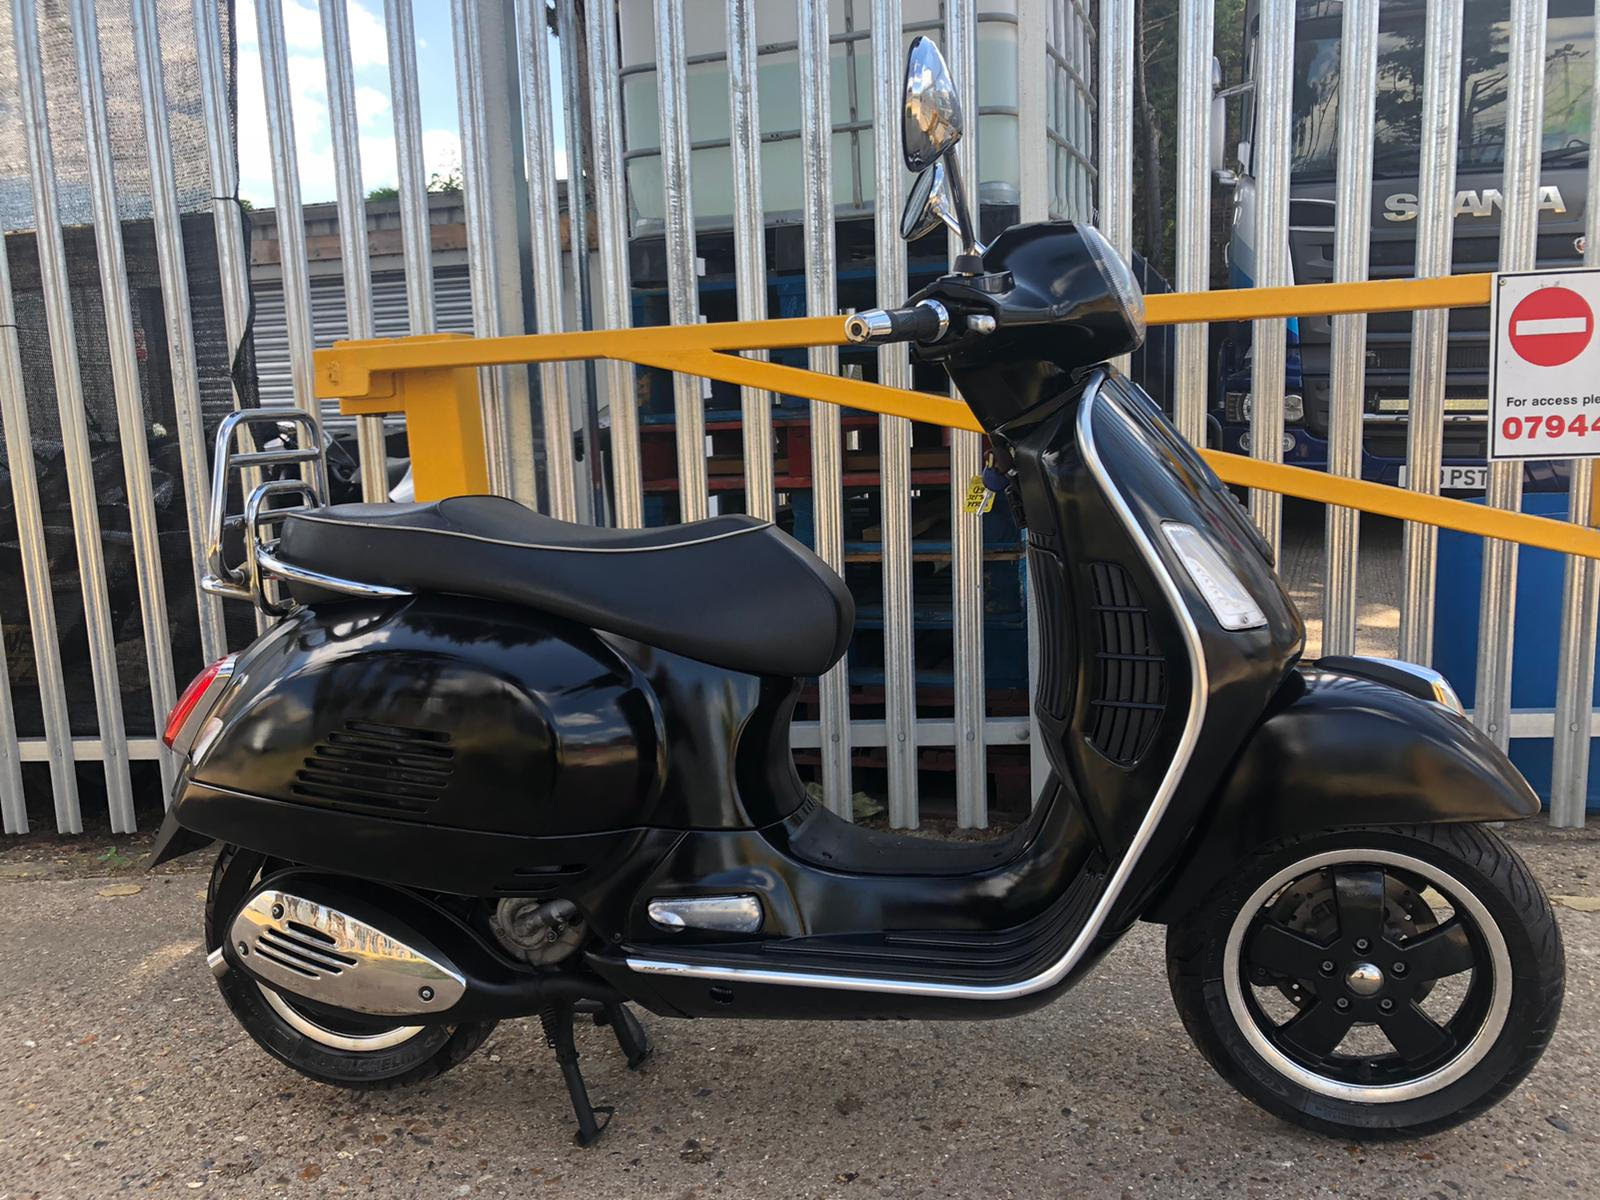 Piaggio Vespa GTS 125 Super ABS Scooter 124cc 2015 SOLD - VIP Motorcycles  and Scooters